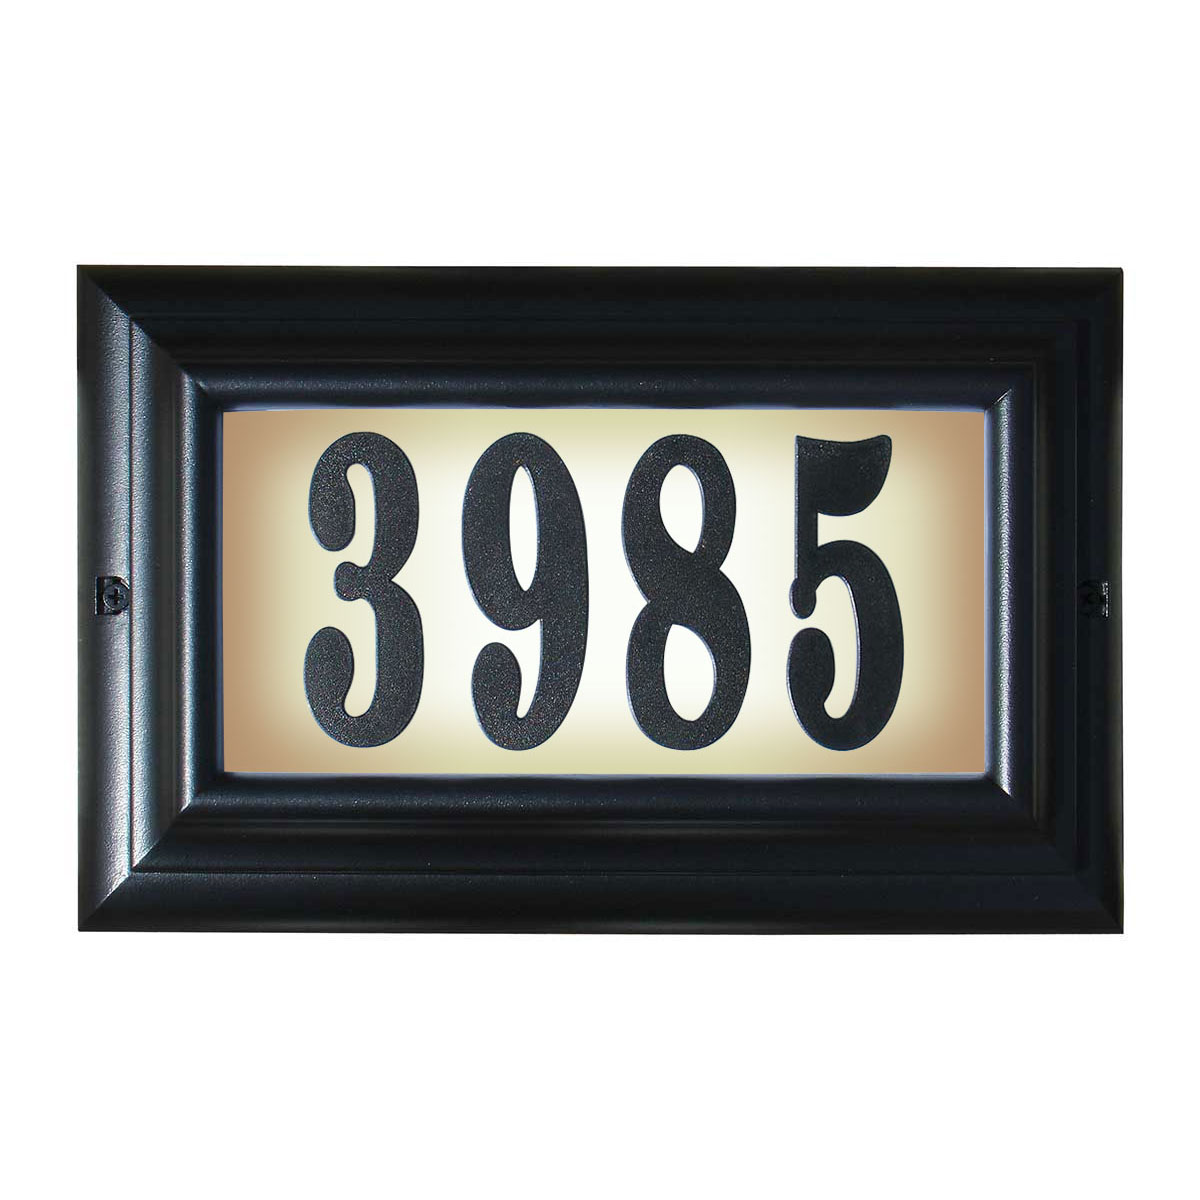 Edgewood Large "do It Yourself Kit" Lighted Address Plaque With Led Lights In Black Frame Color